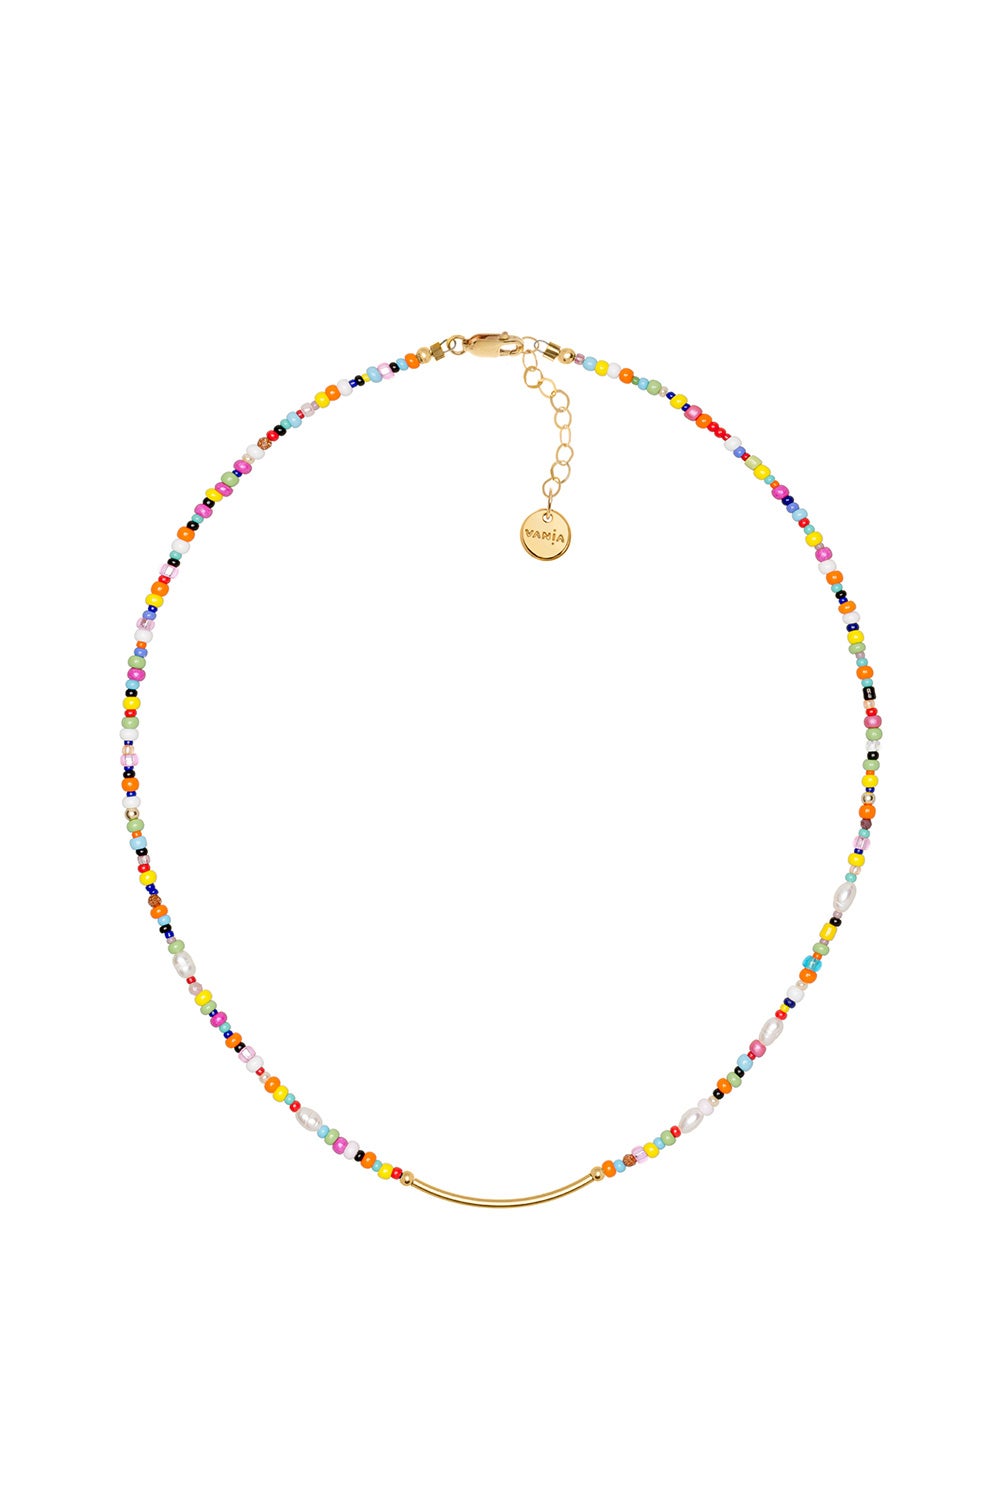 Colorful and Unique Czech Glass Beaded Necklace. – The Artwerks